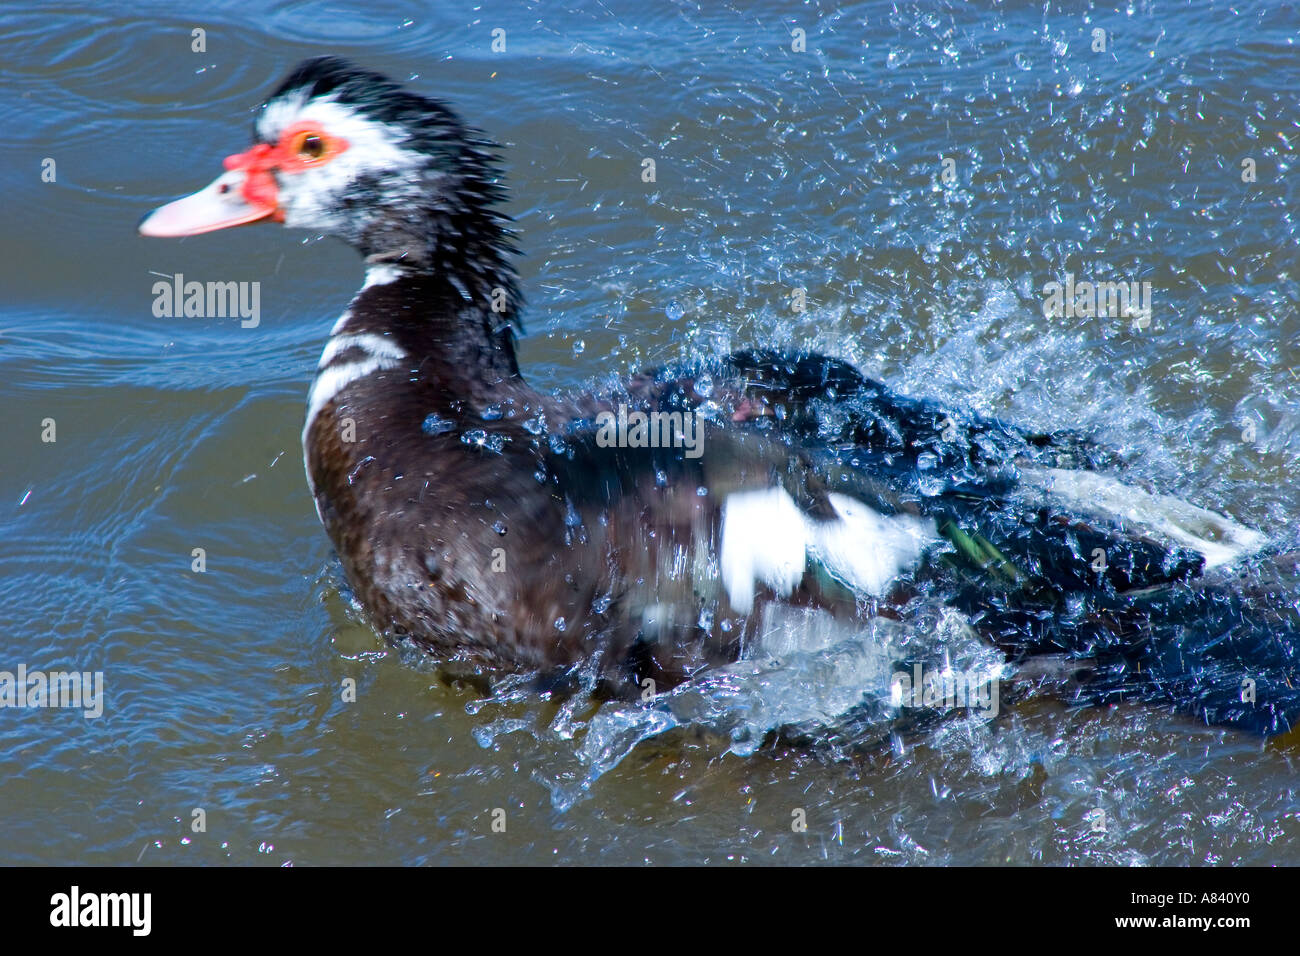 Adult Duck, Domestic Muscovy Splashes Lake Water After Landing, Cairina moschata Stock Photo